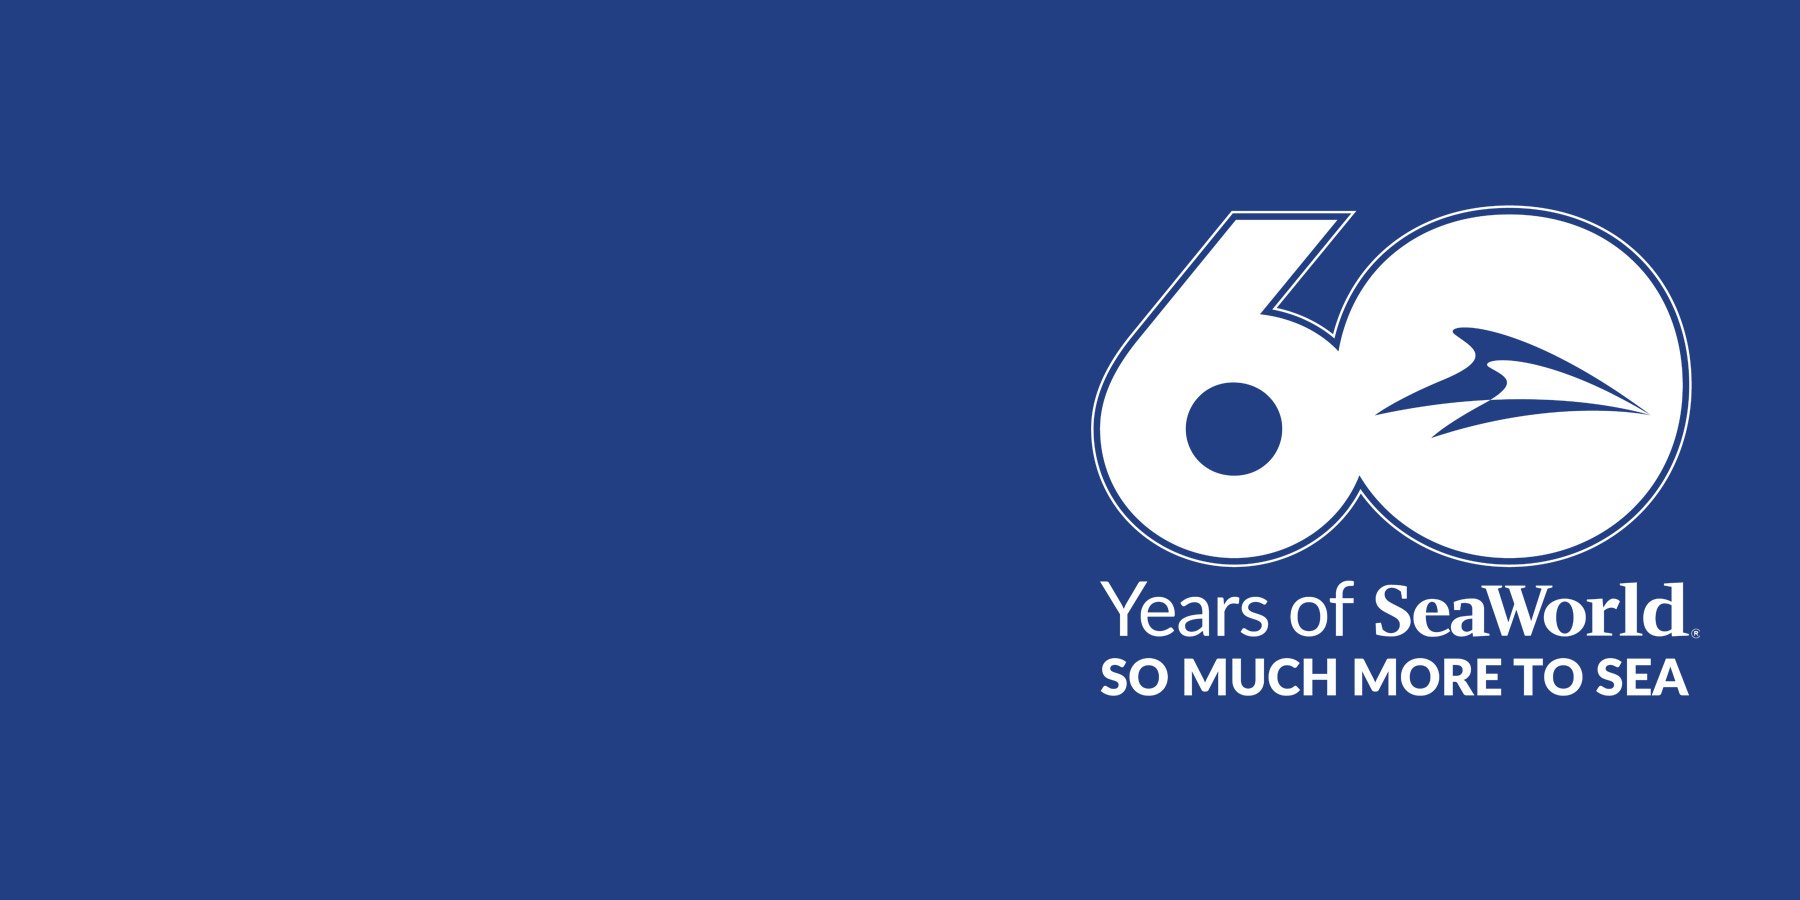 60 Years of SeaWorld So Much More to Sea logo